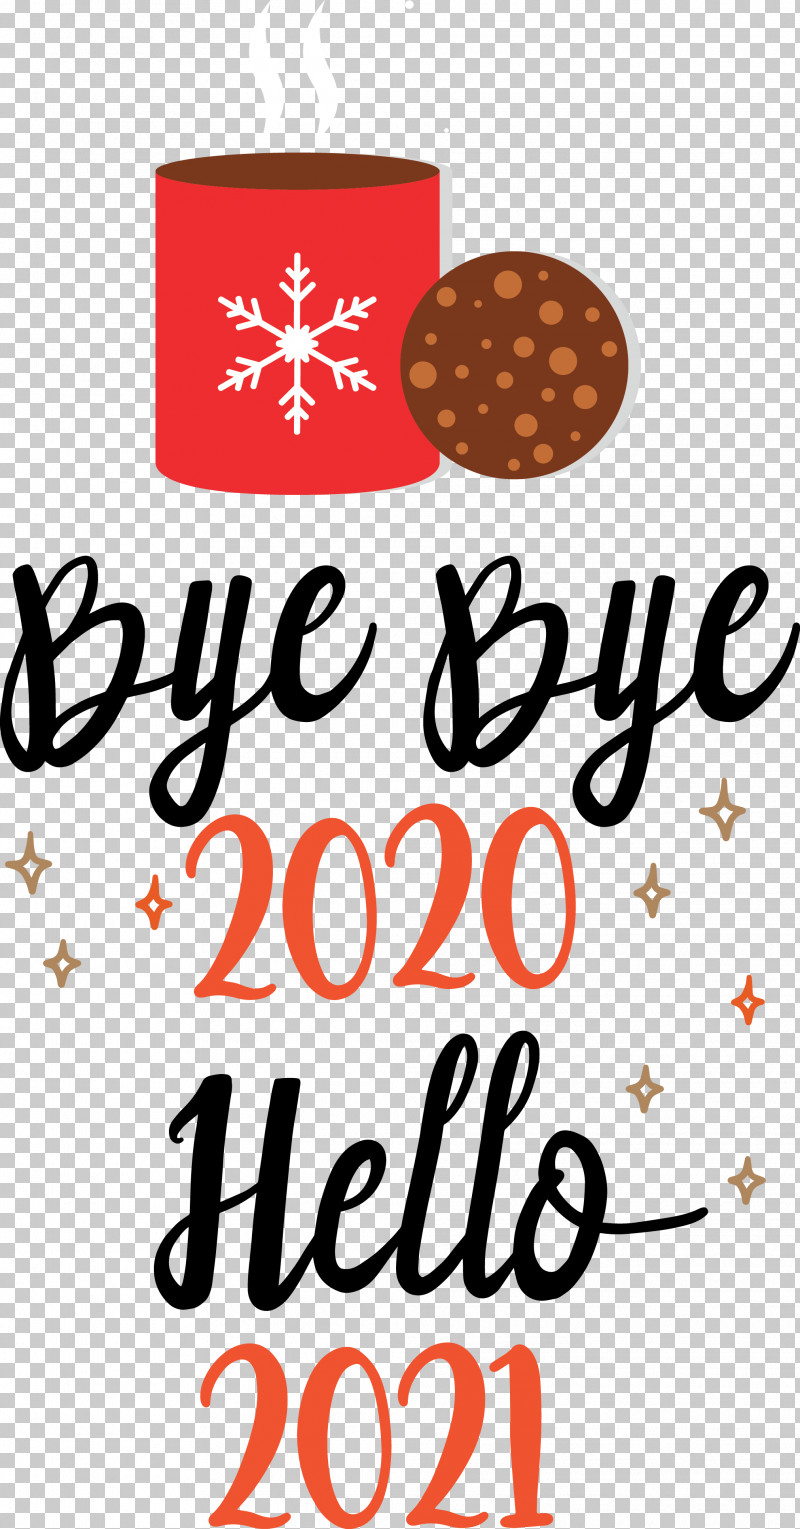 Hello 2021 Year Bye Bye 2020 Year PNG, Clipart, Bye Bye 2020 Year, Geometry, Hello 2021 Year, Line, Logo Free PNG Download